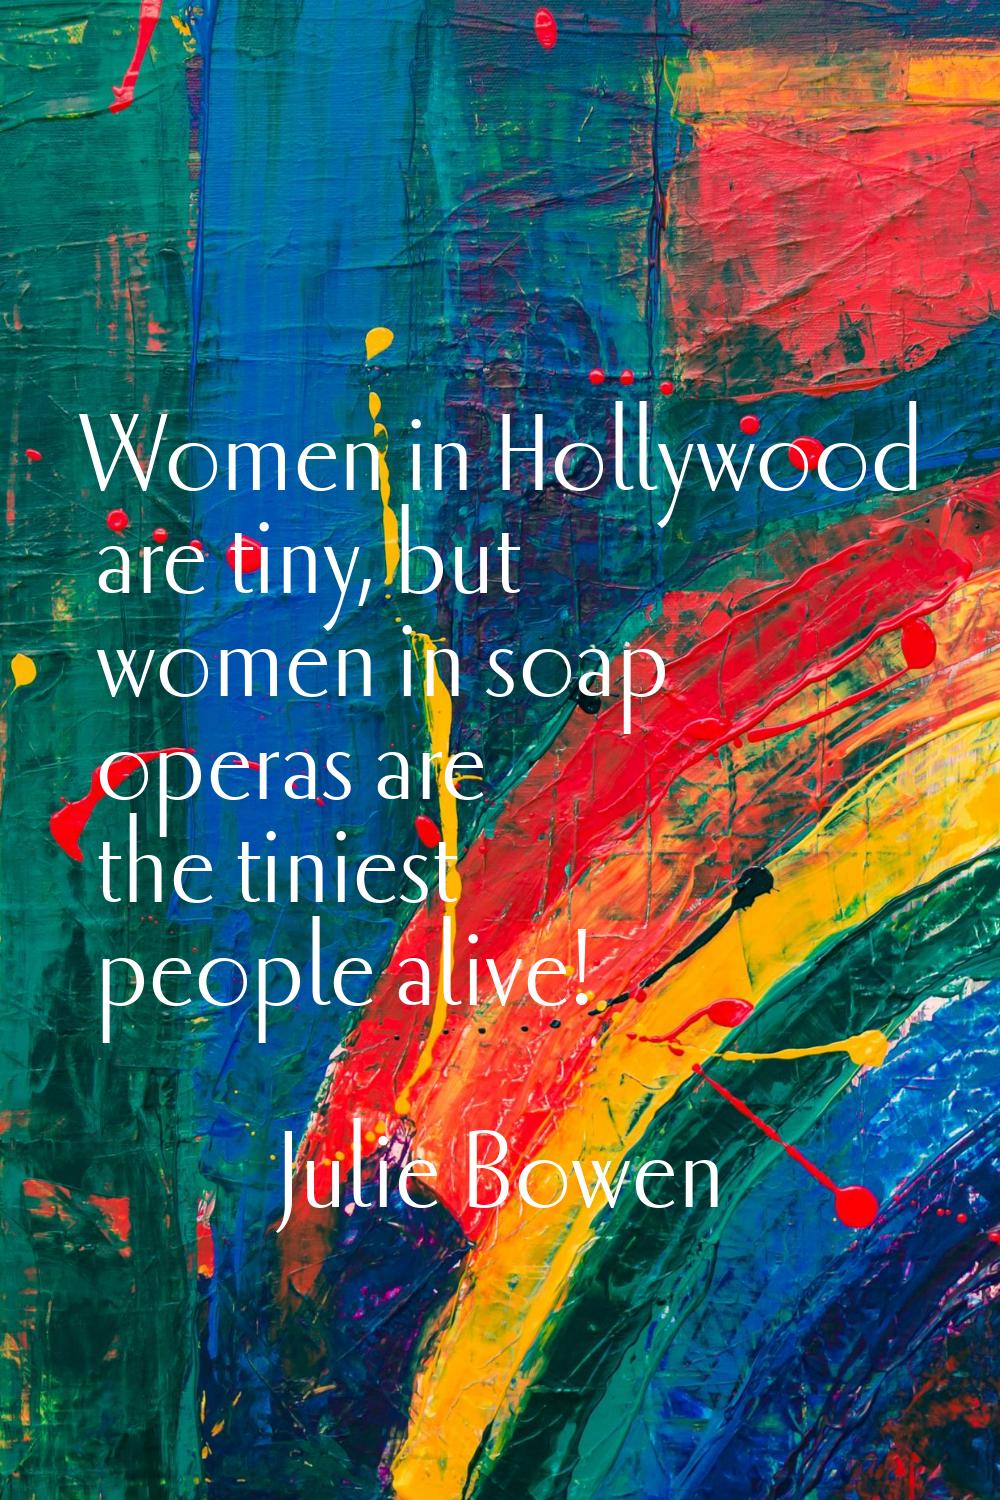 Women in Hollywood are tiny, but women in soap operas are the tiniest people alive!